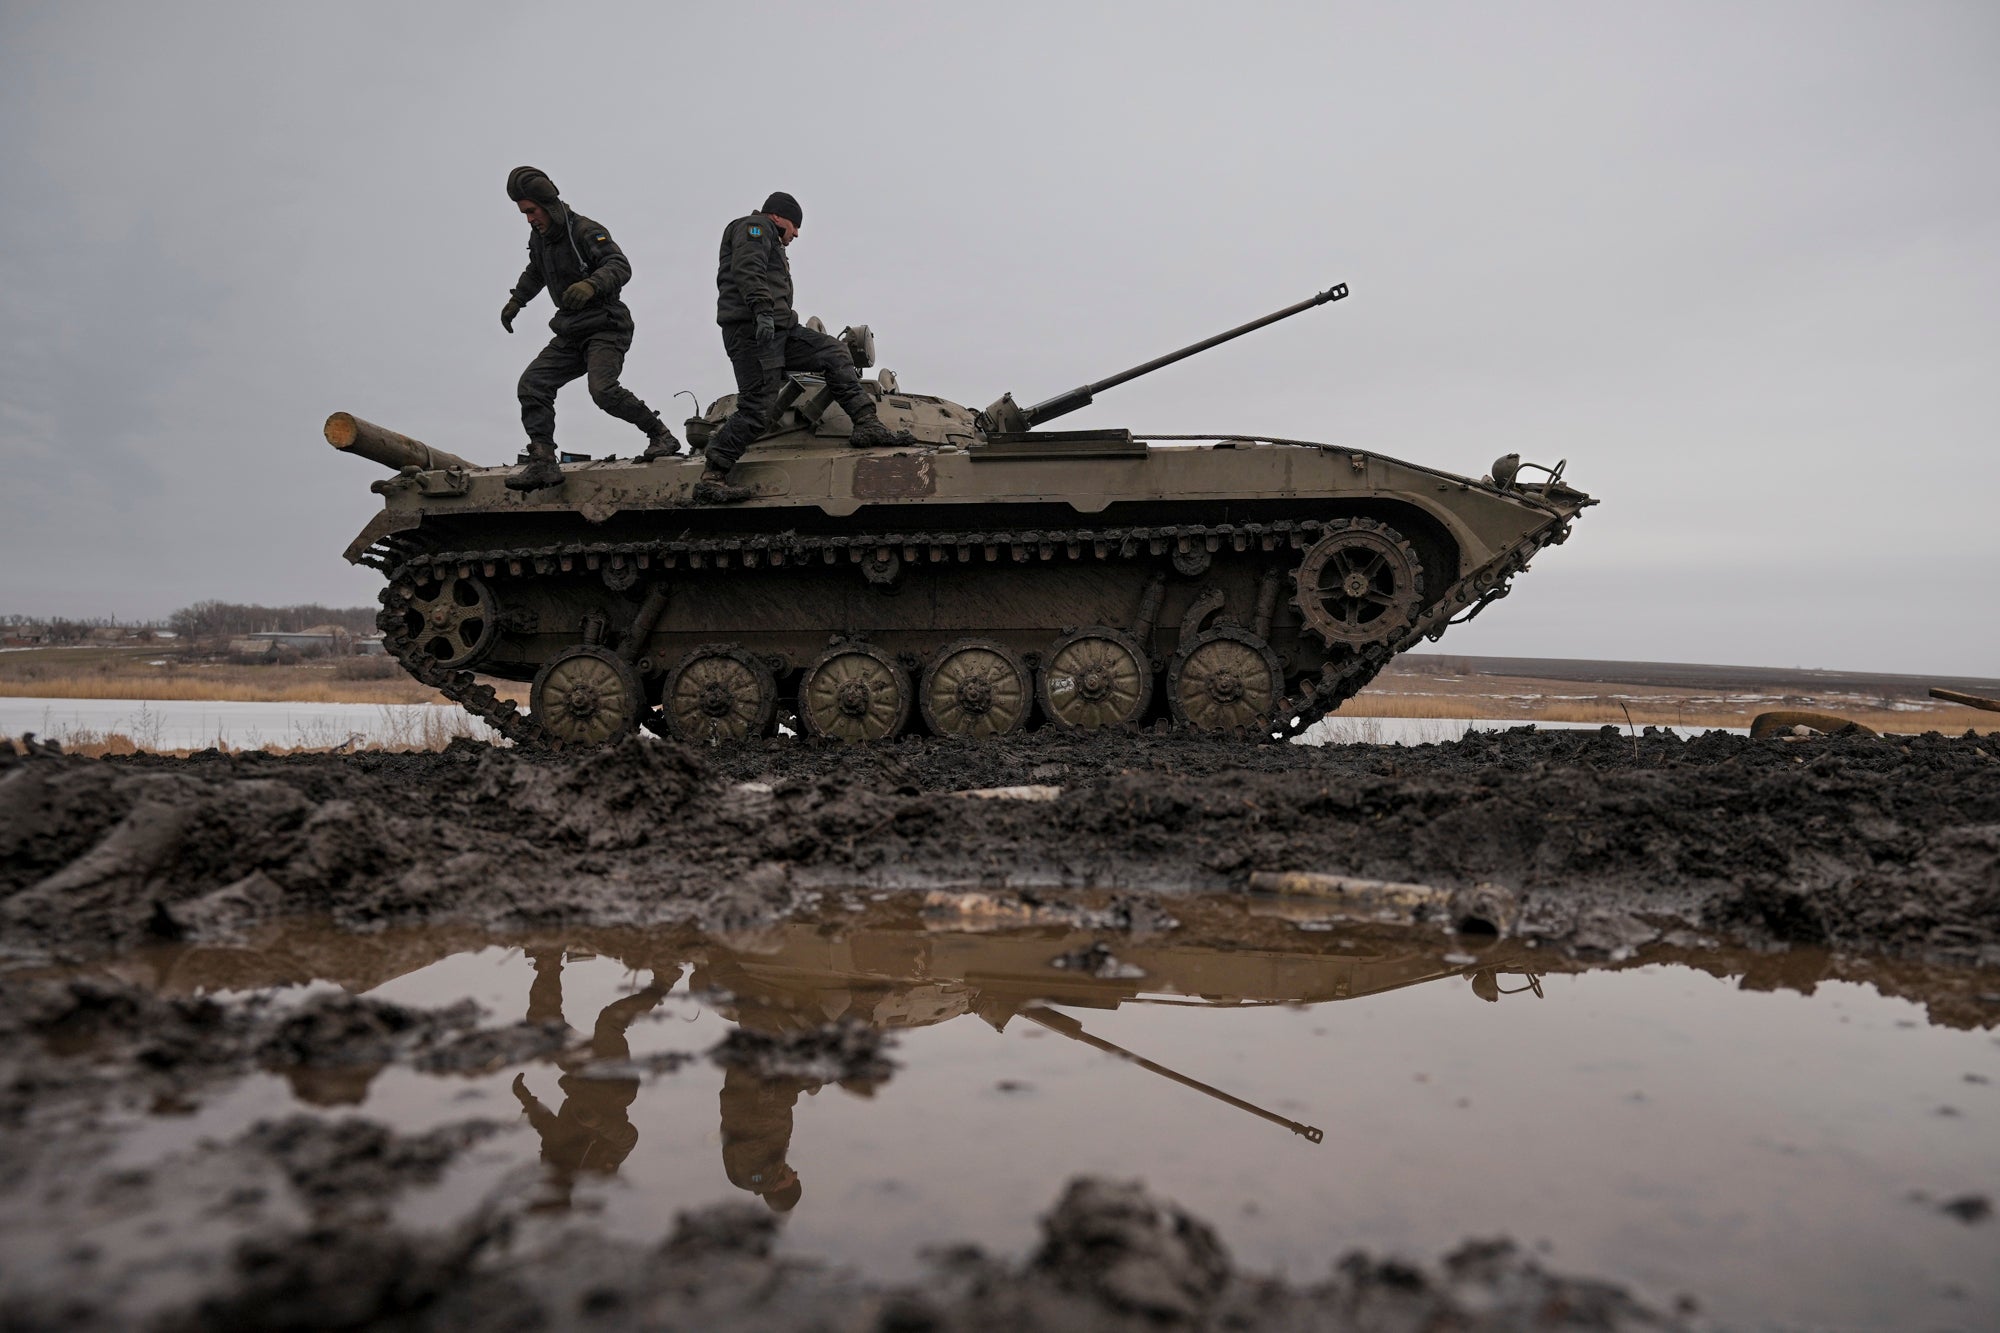 Ukrainian servicemen walk on an armoured fighting vehicle during an exercise in the controlled area in the Donetsk region (Vadim Ghirda/AP)